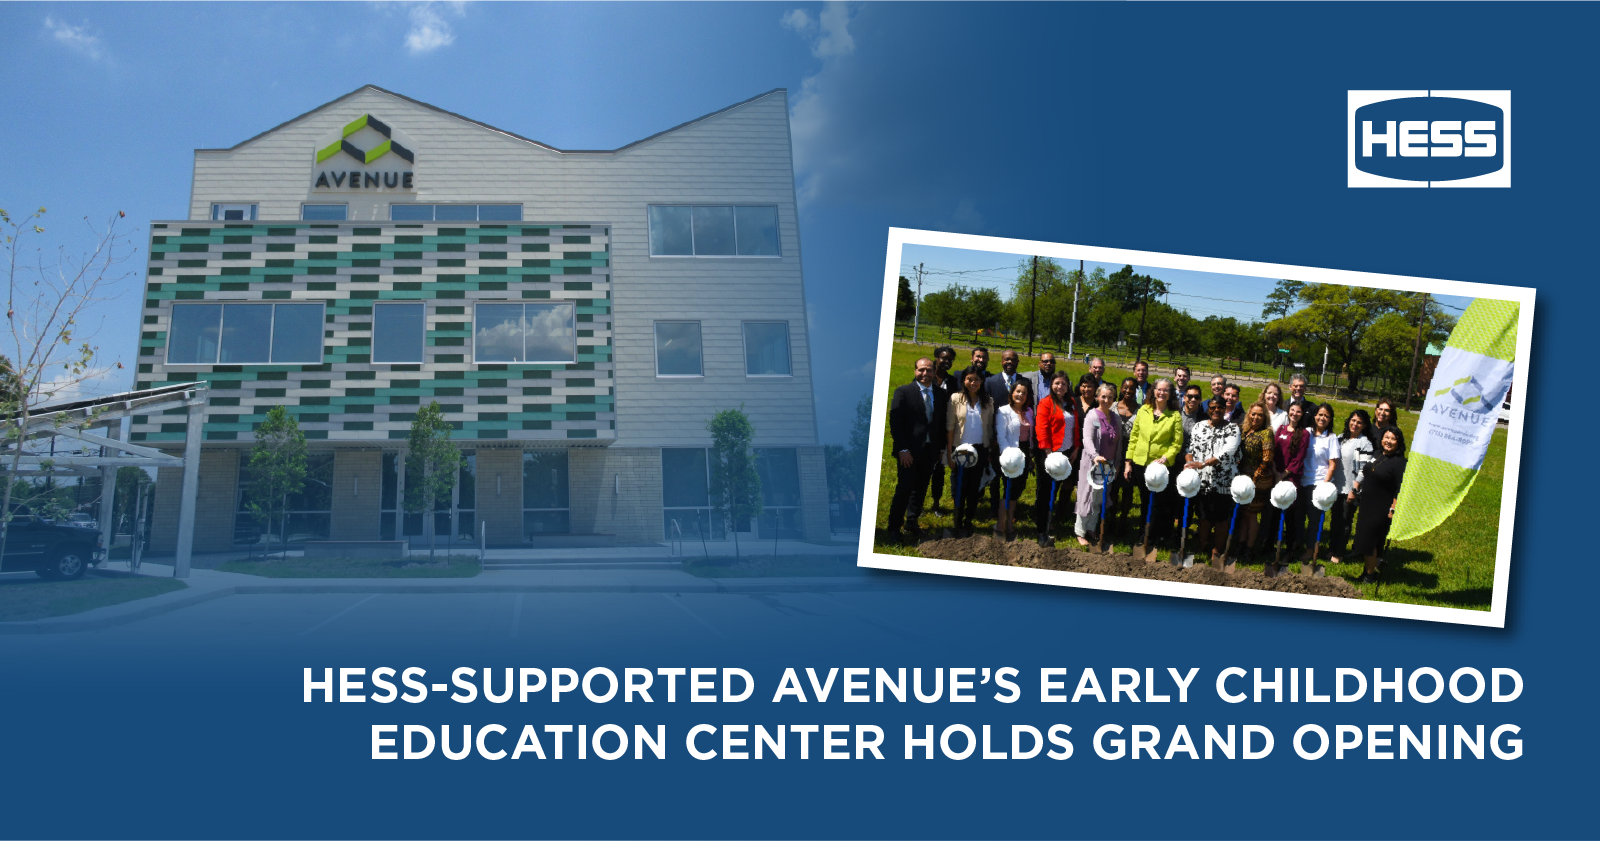 Hess Supports Avenue Center’s New Early Childhood Education Center